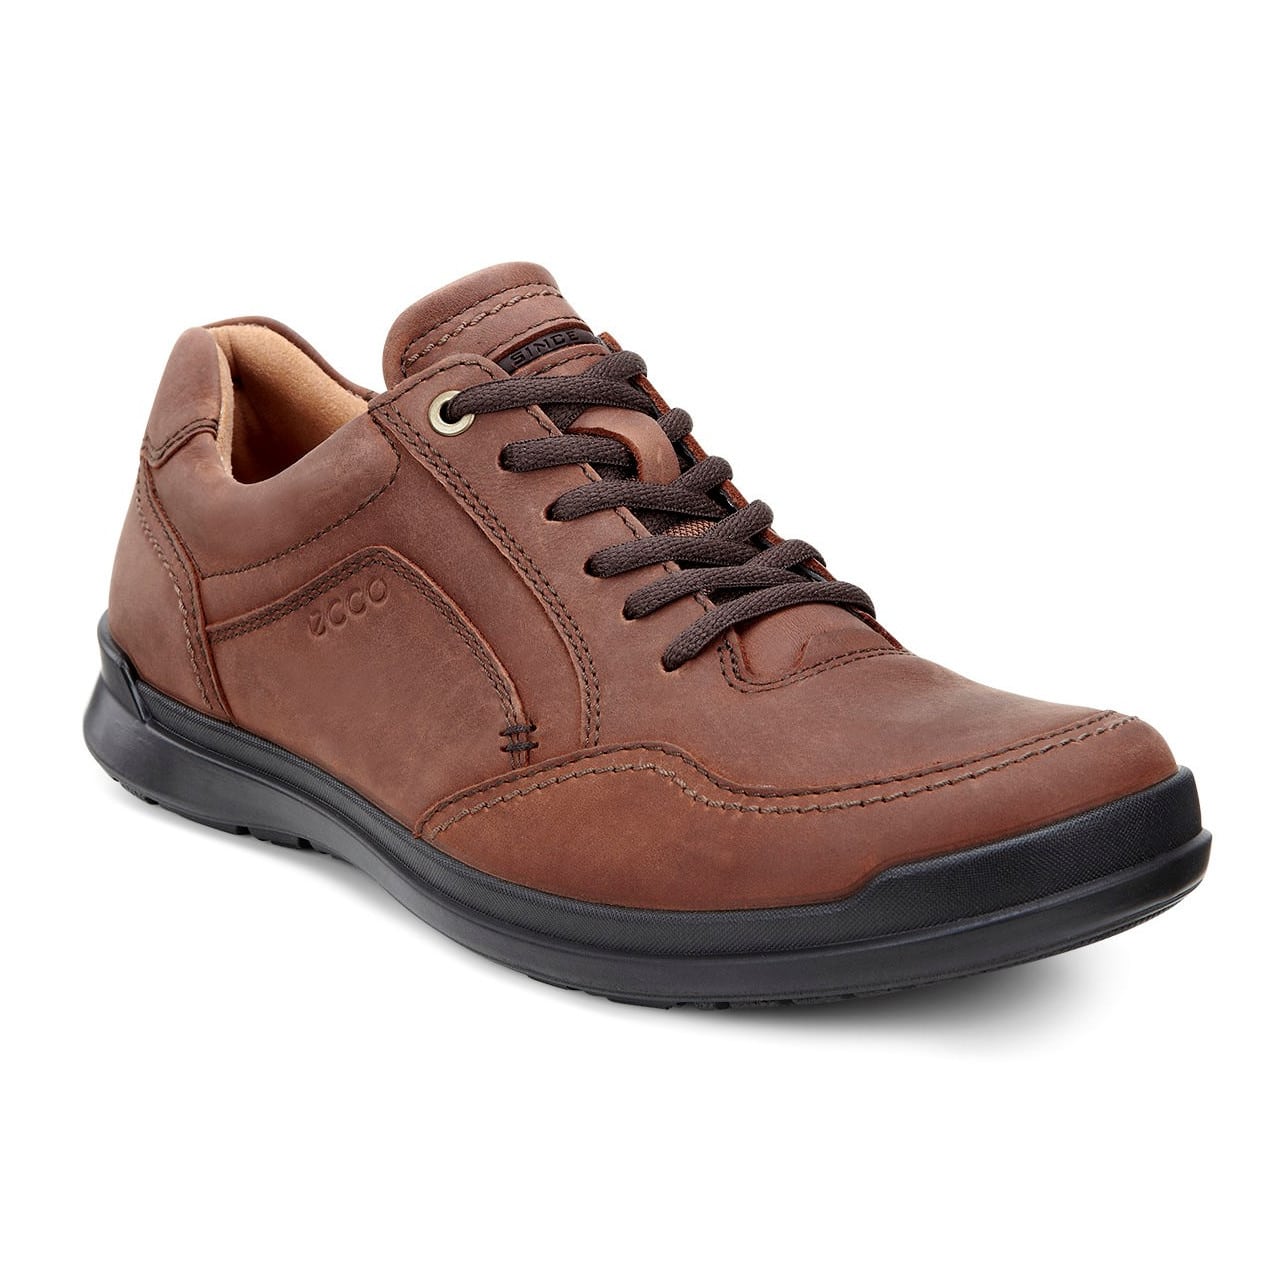 Ecco Howell - 121 Shoes